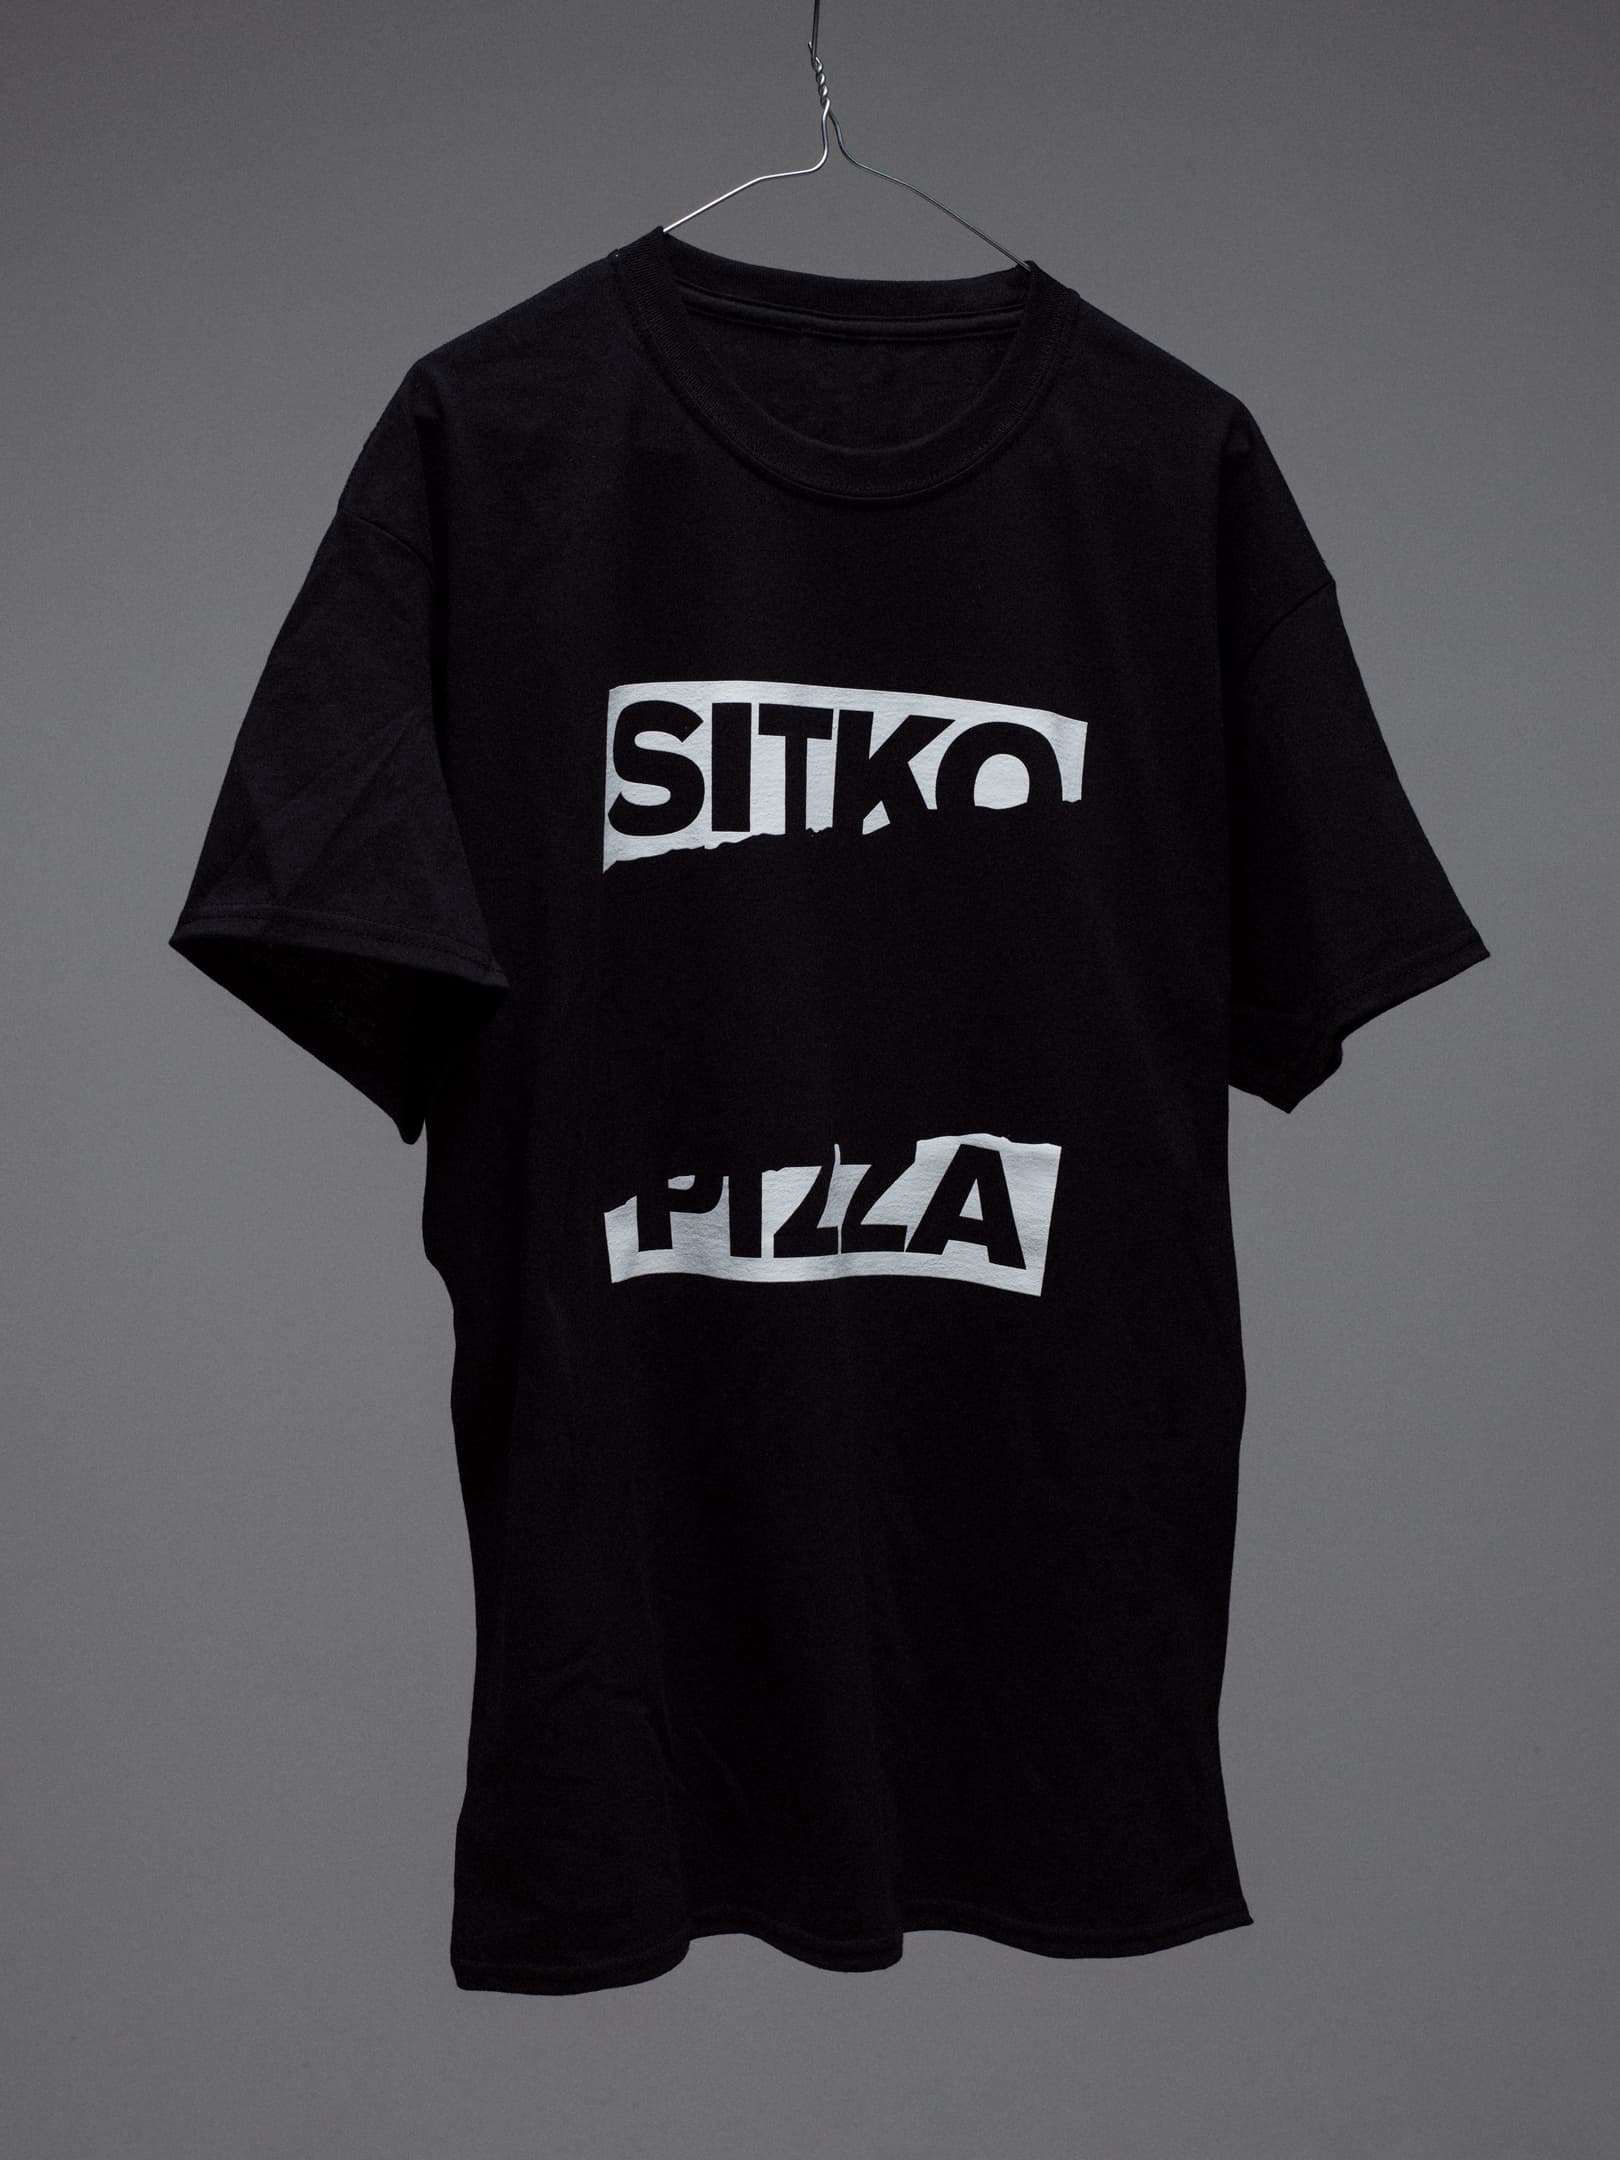 Visual identity and branded t-shirt design by Werklig for Sitko Pizza Co.